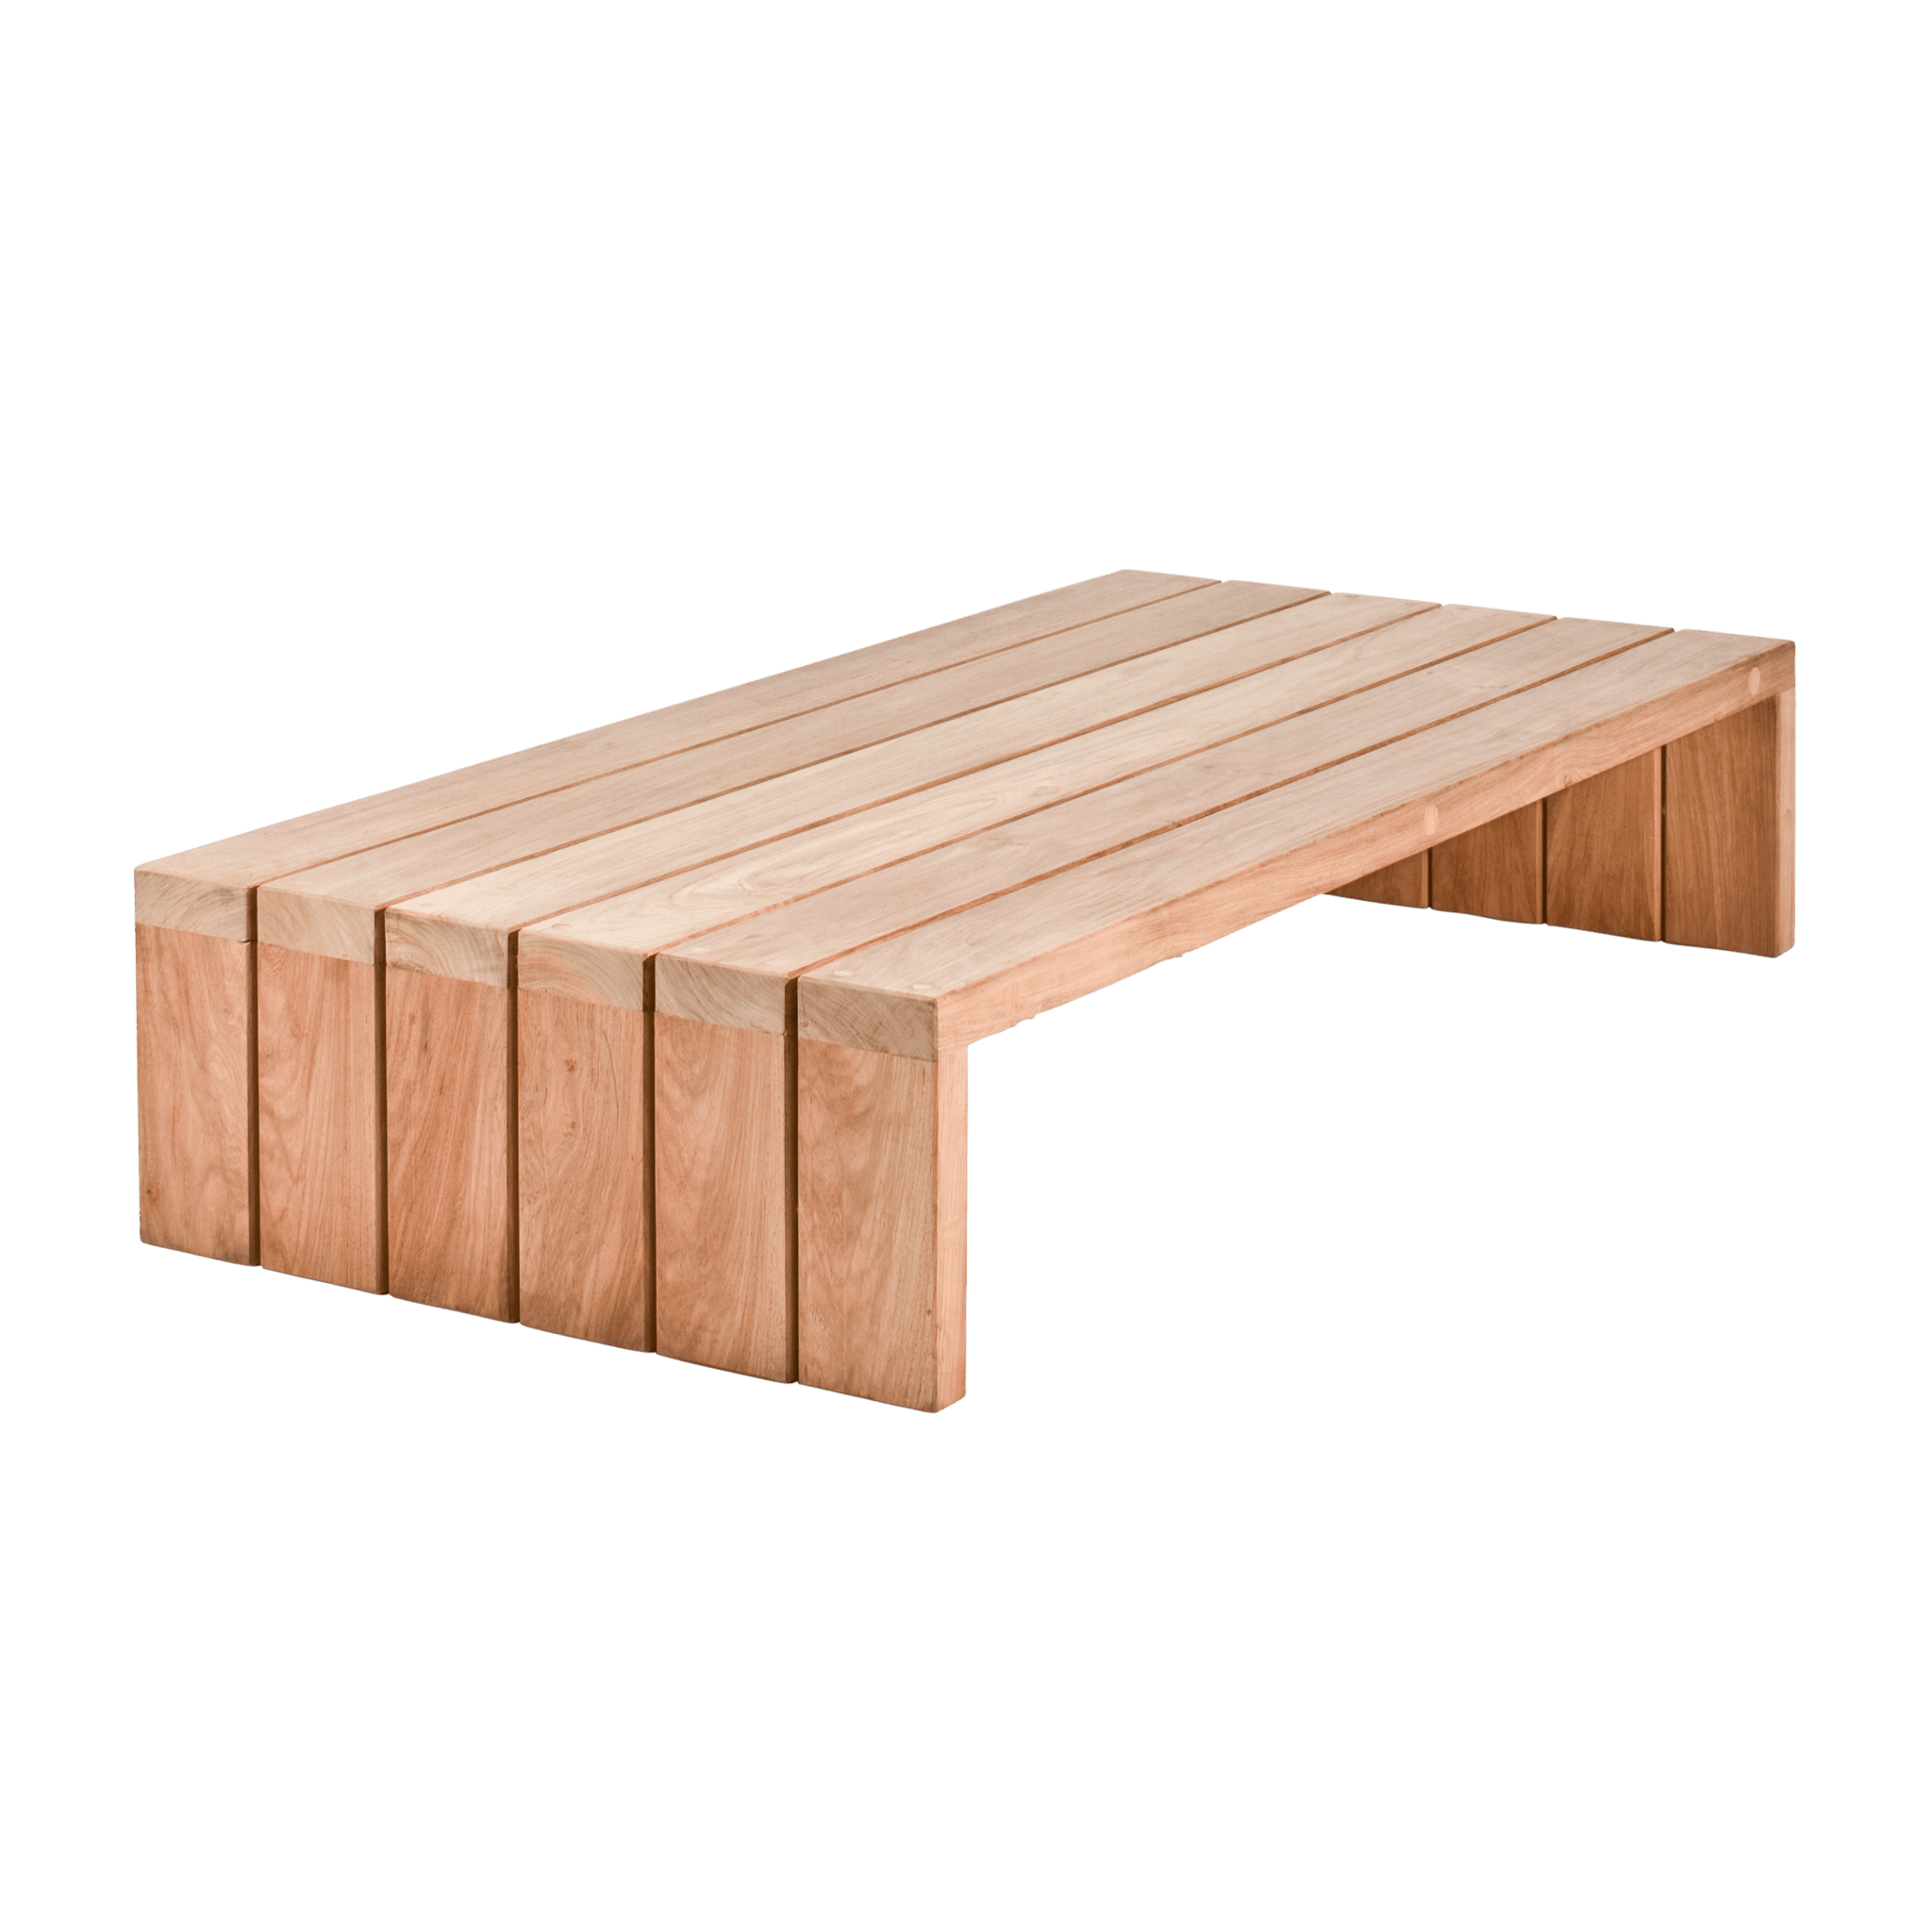 Plank Coffee Table